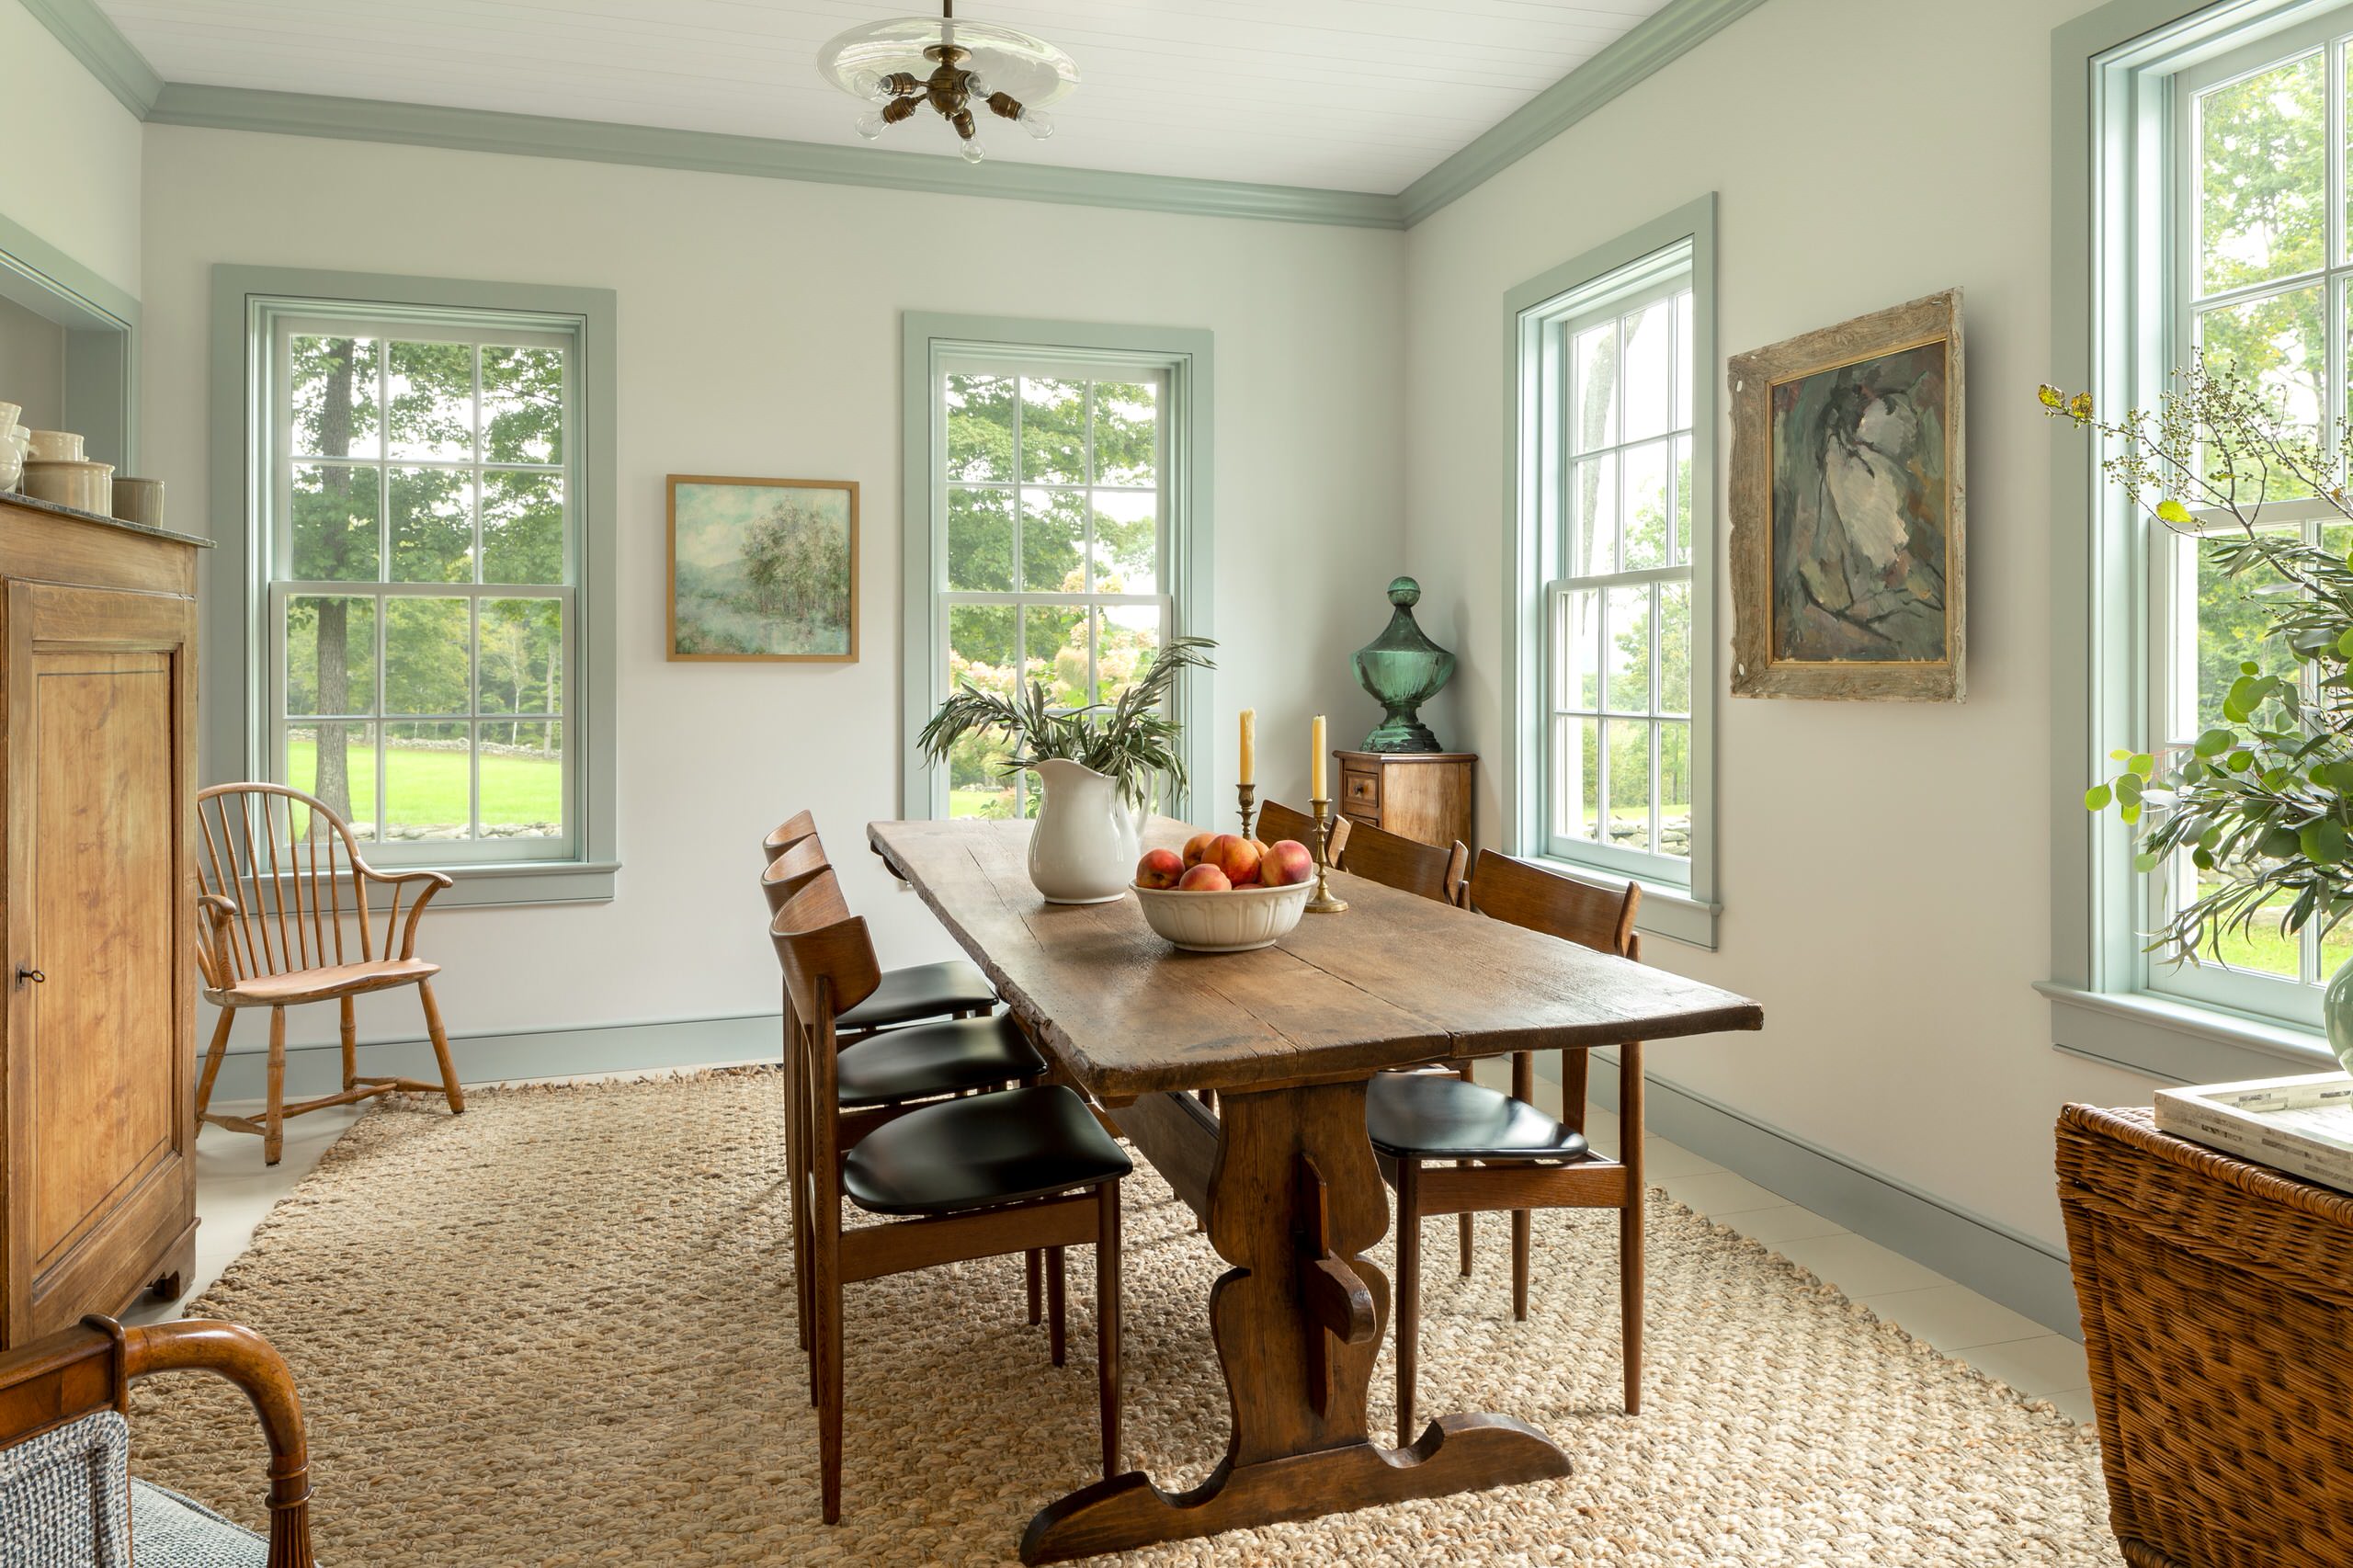 75 Beautiful Farmhouse Green Dining Room Pictures Ideas February 2021 Houzz